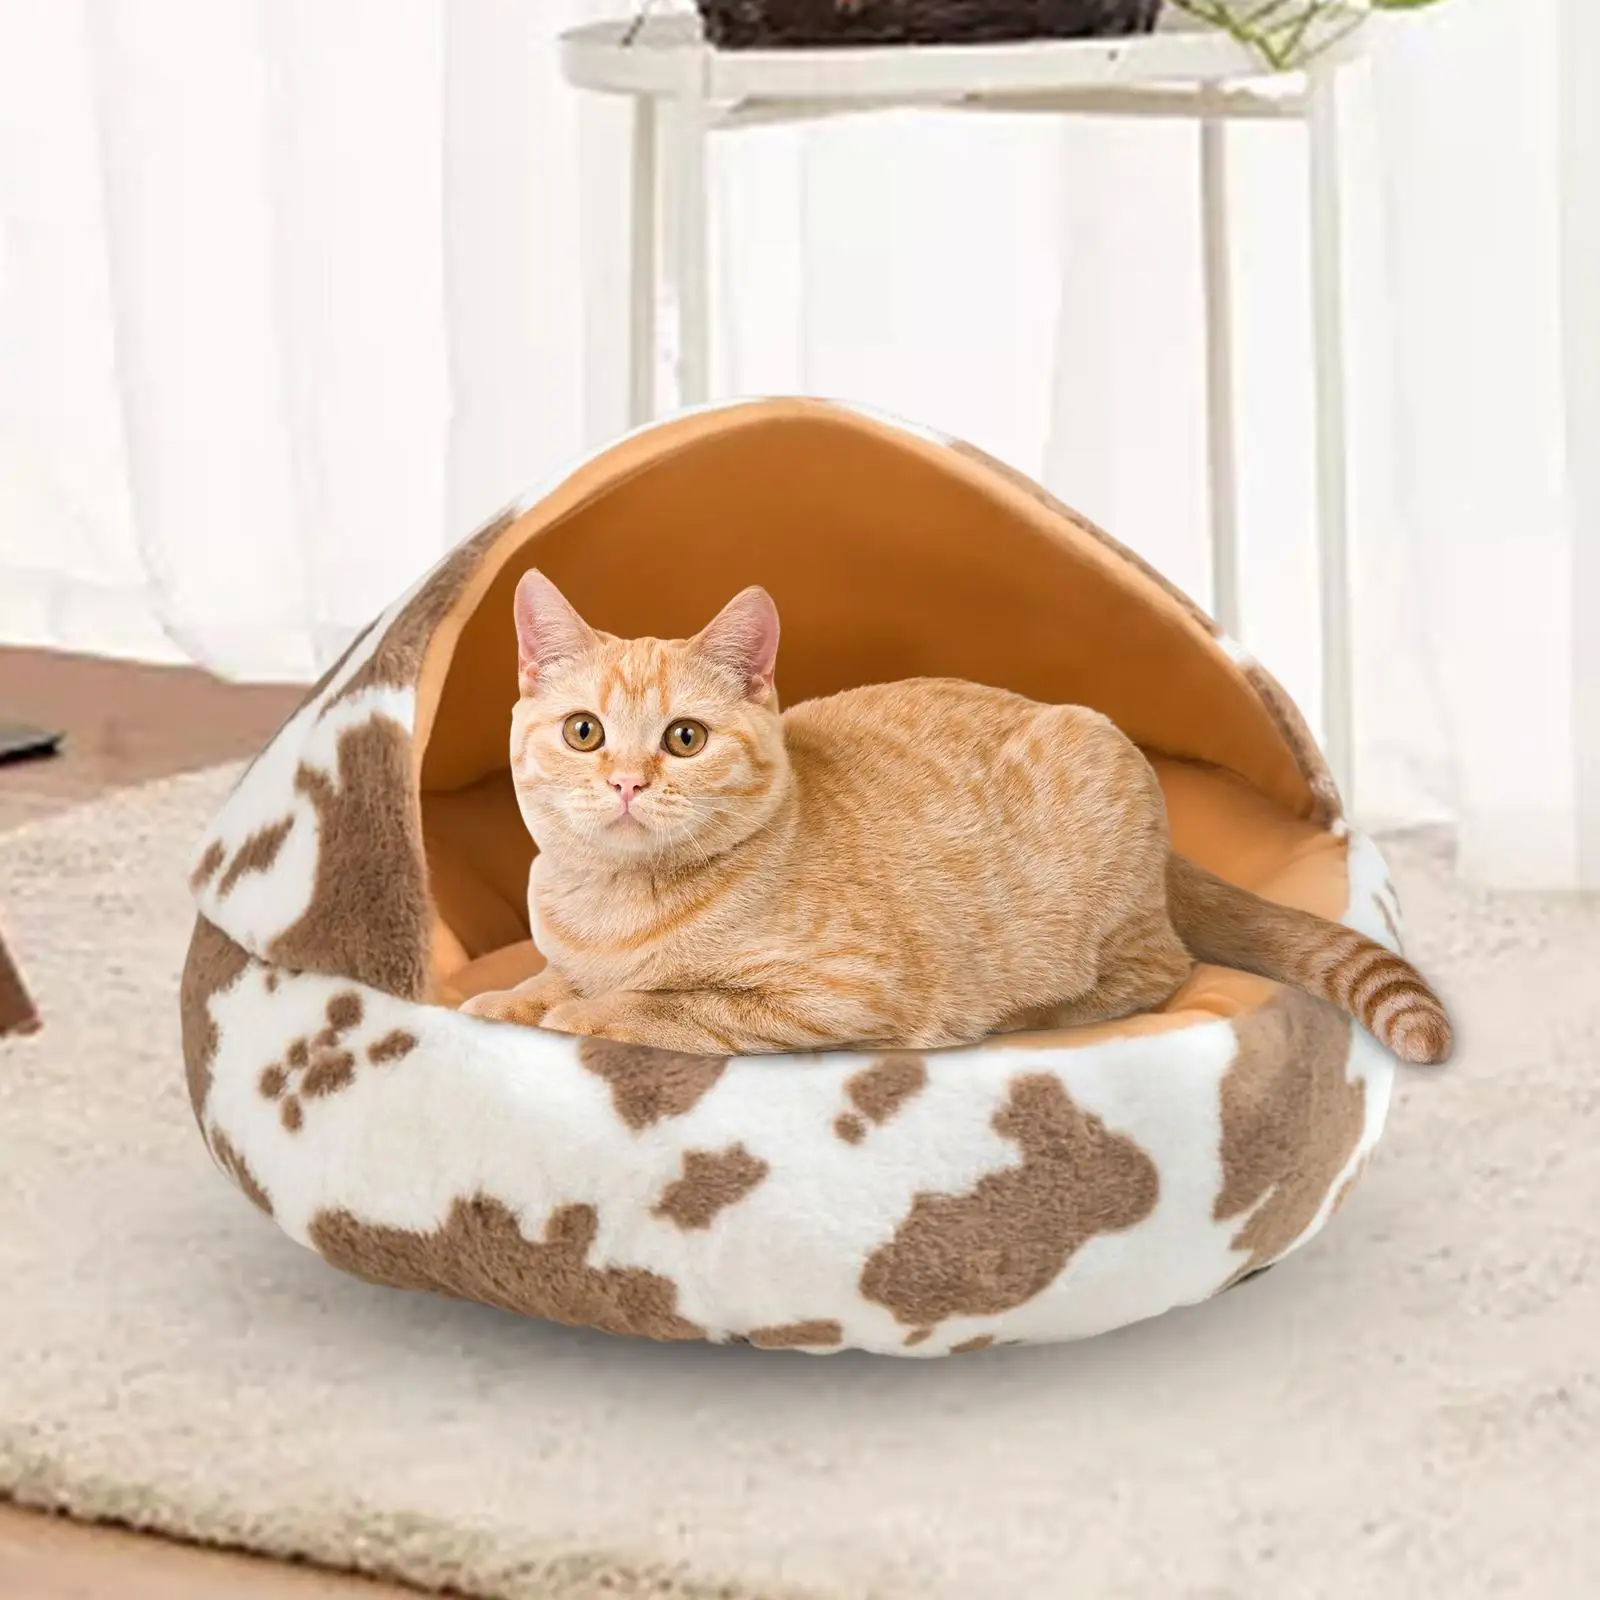 Warm Pet House Dog Tent Self Warming Soft Cushion Cave Cat Bed for Kitten Sleeping